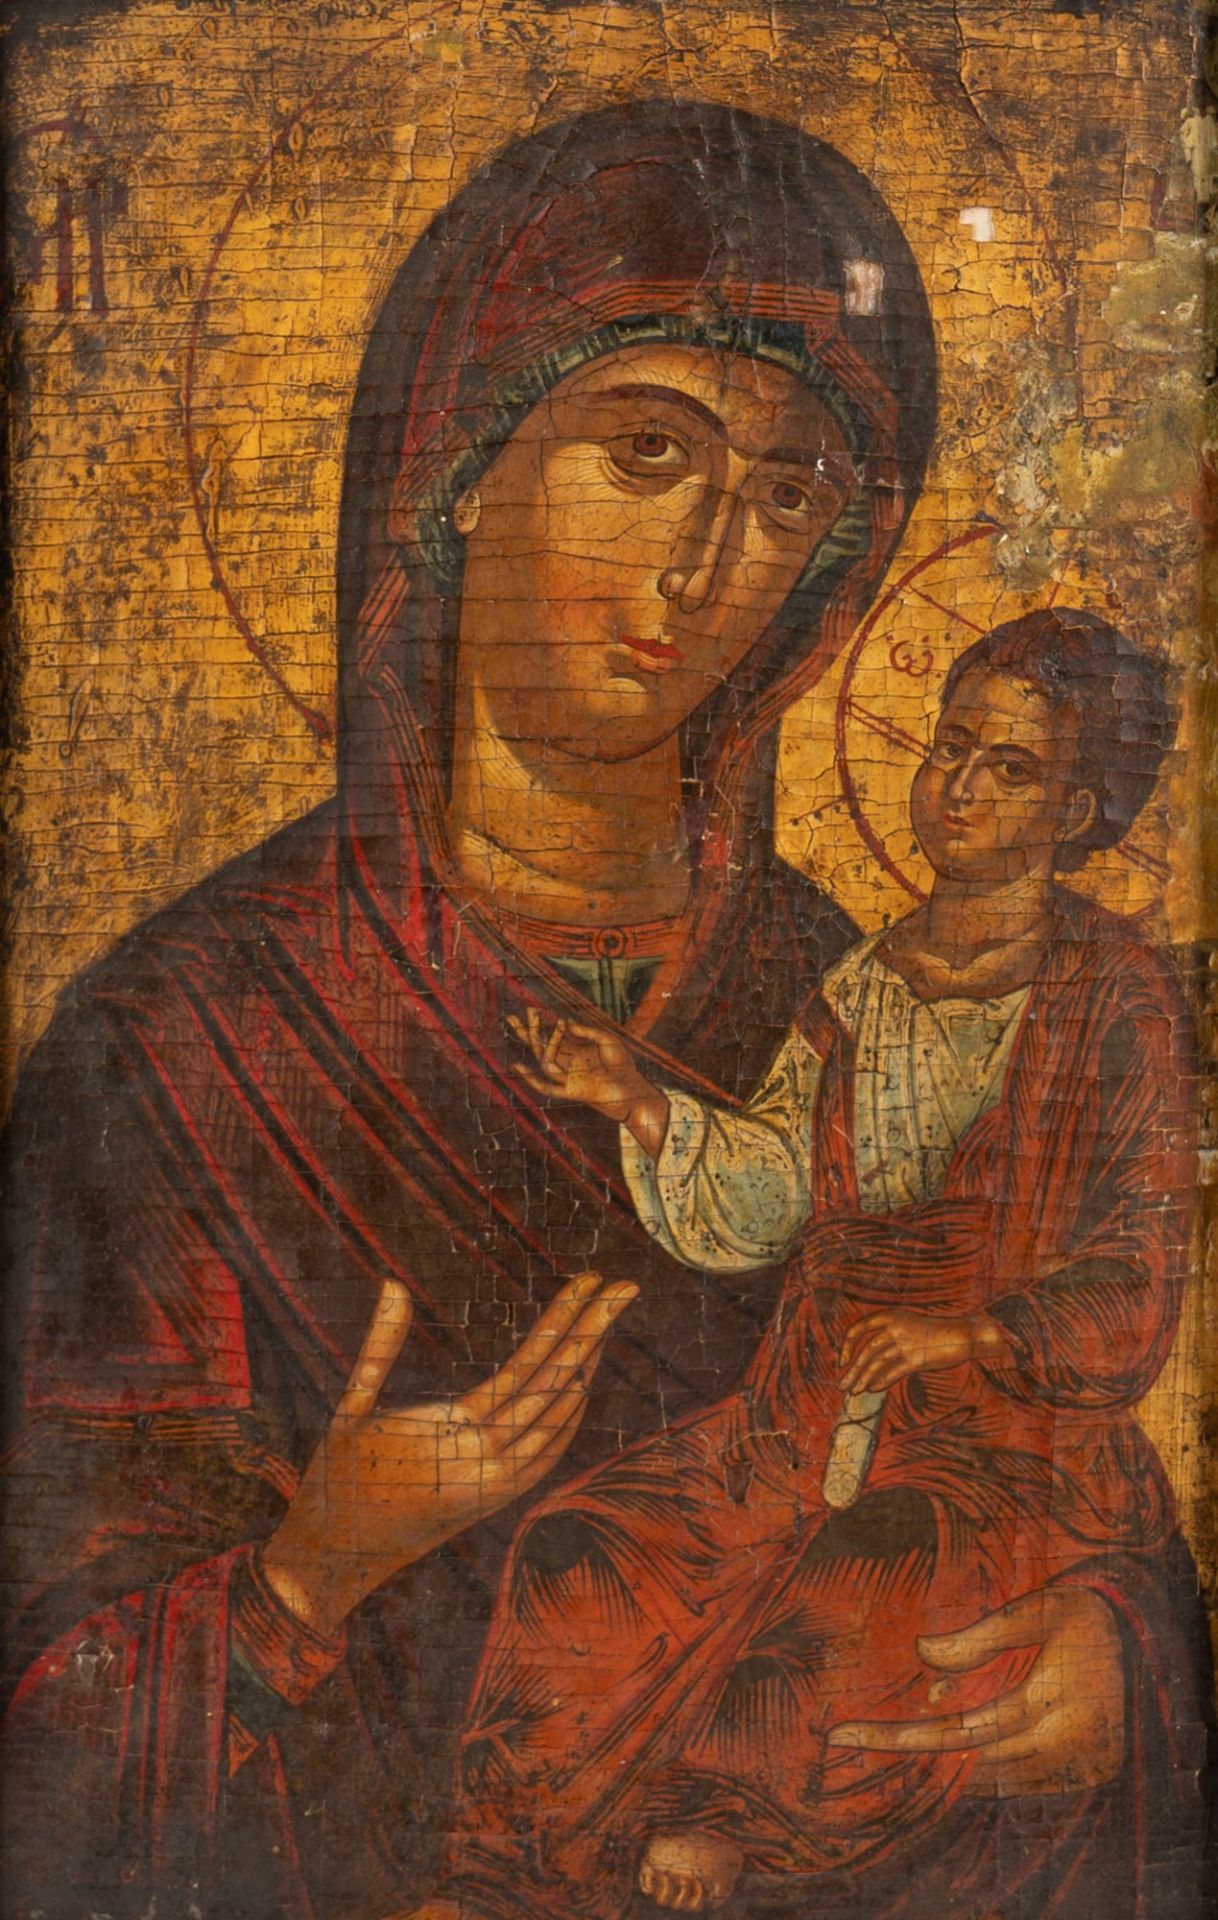 Icon representing the Madonna with Child - Image 2 of 3